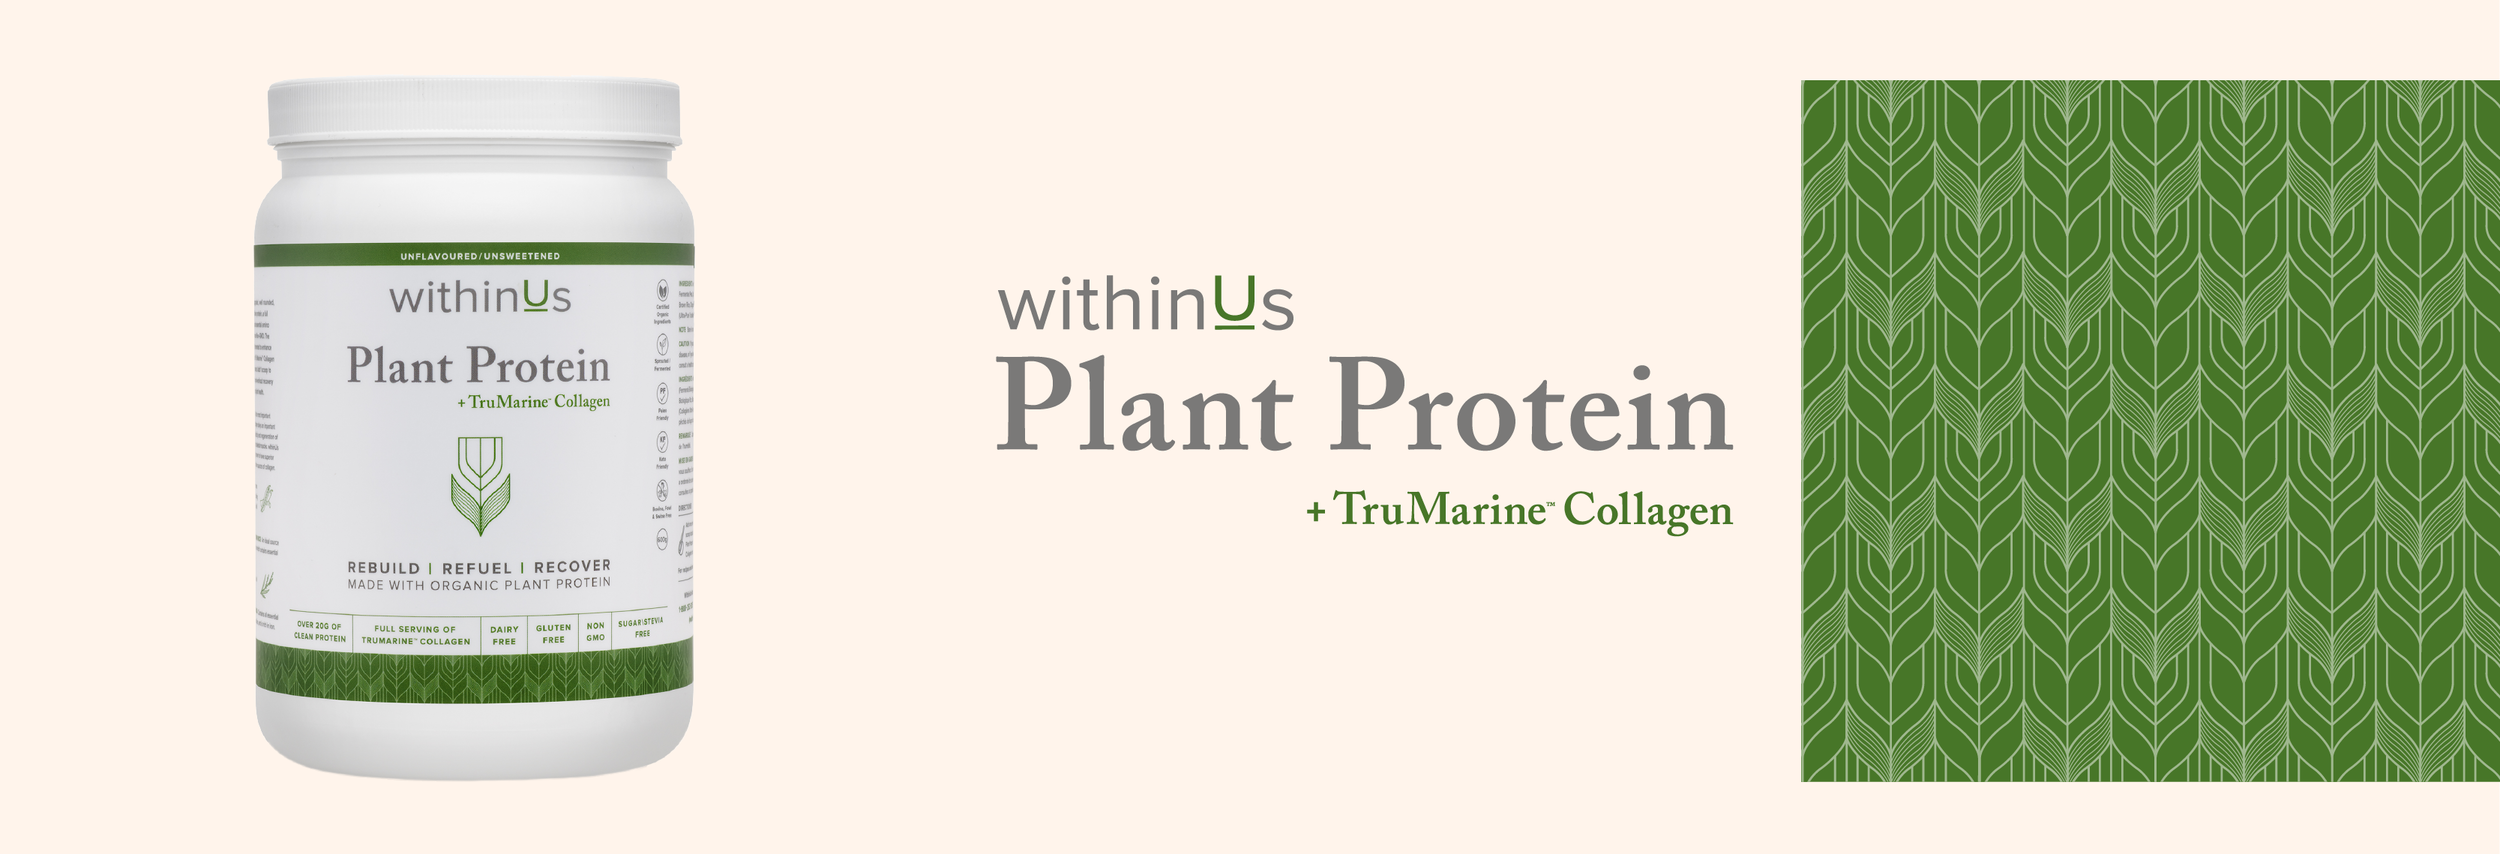 withinUs-Product-Design_Plant-Protein.png